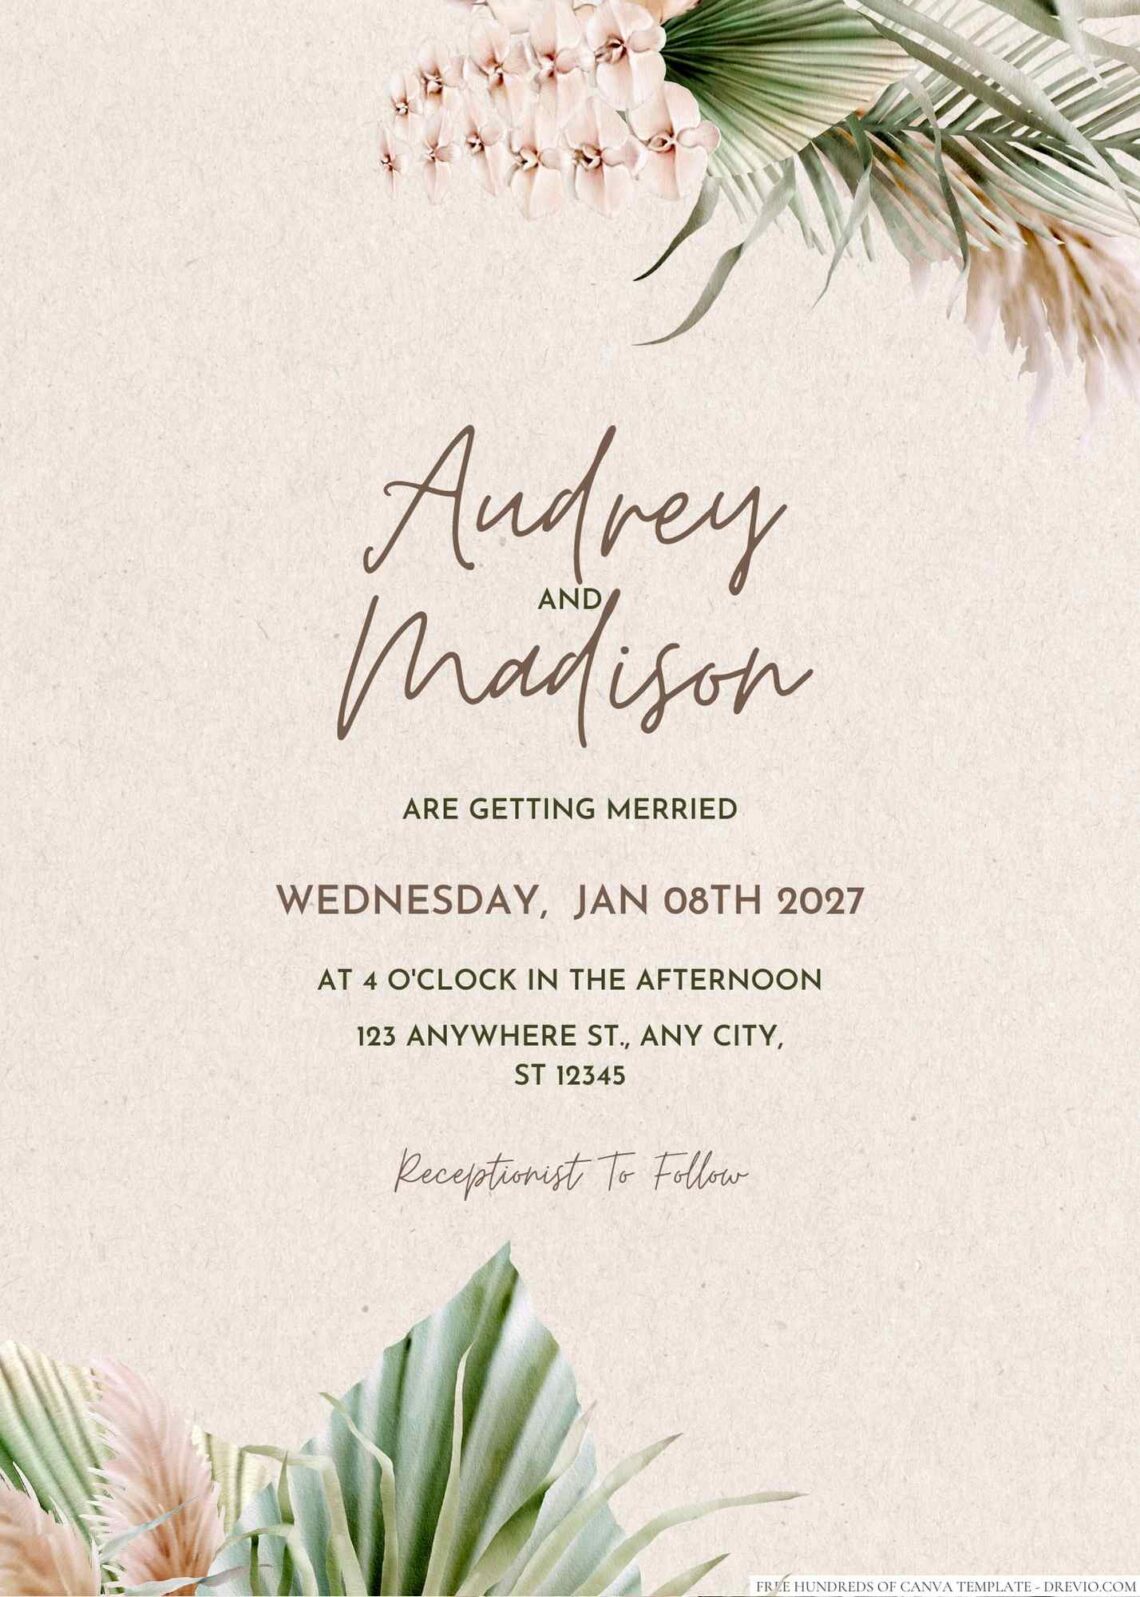 Free Editable Rustic Pampas Grass Dried Floral Wedding Invitation